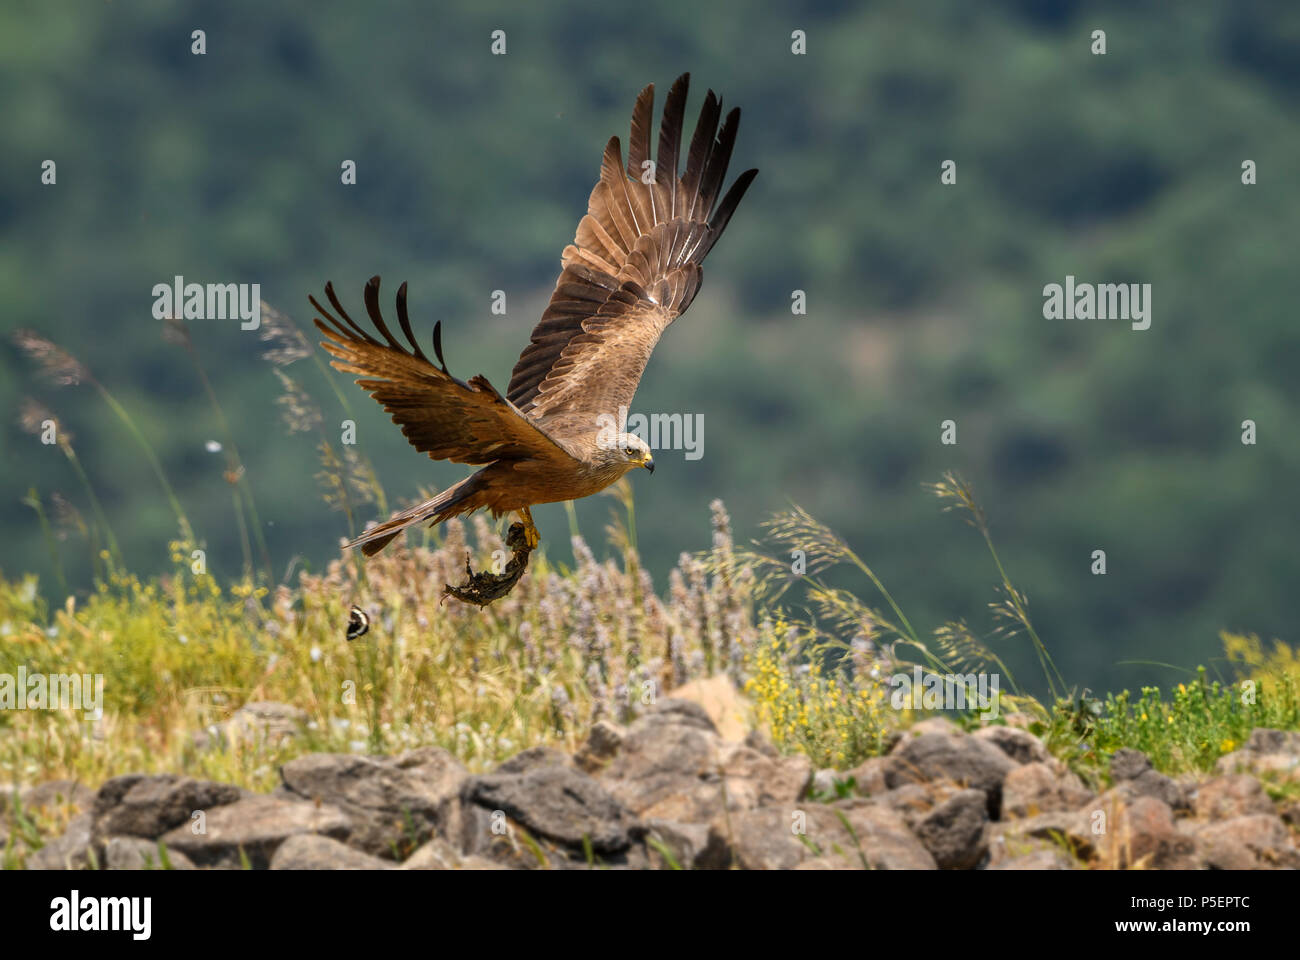 Black Kite - Milvus migrans, beautiful large raptor from Old World forests and hills, Eastern Rodope mountains, Bulgaria. Stock Photo